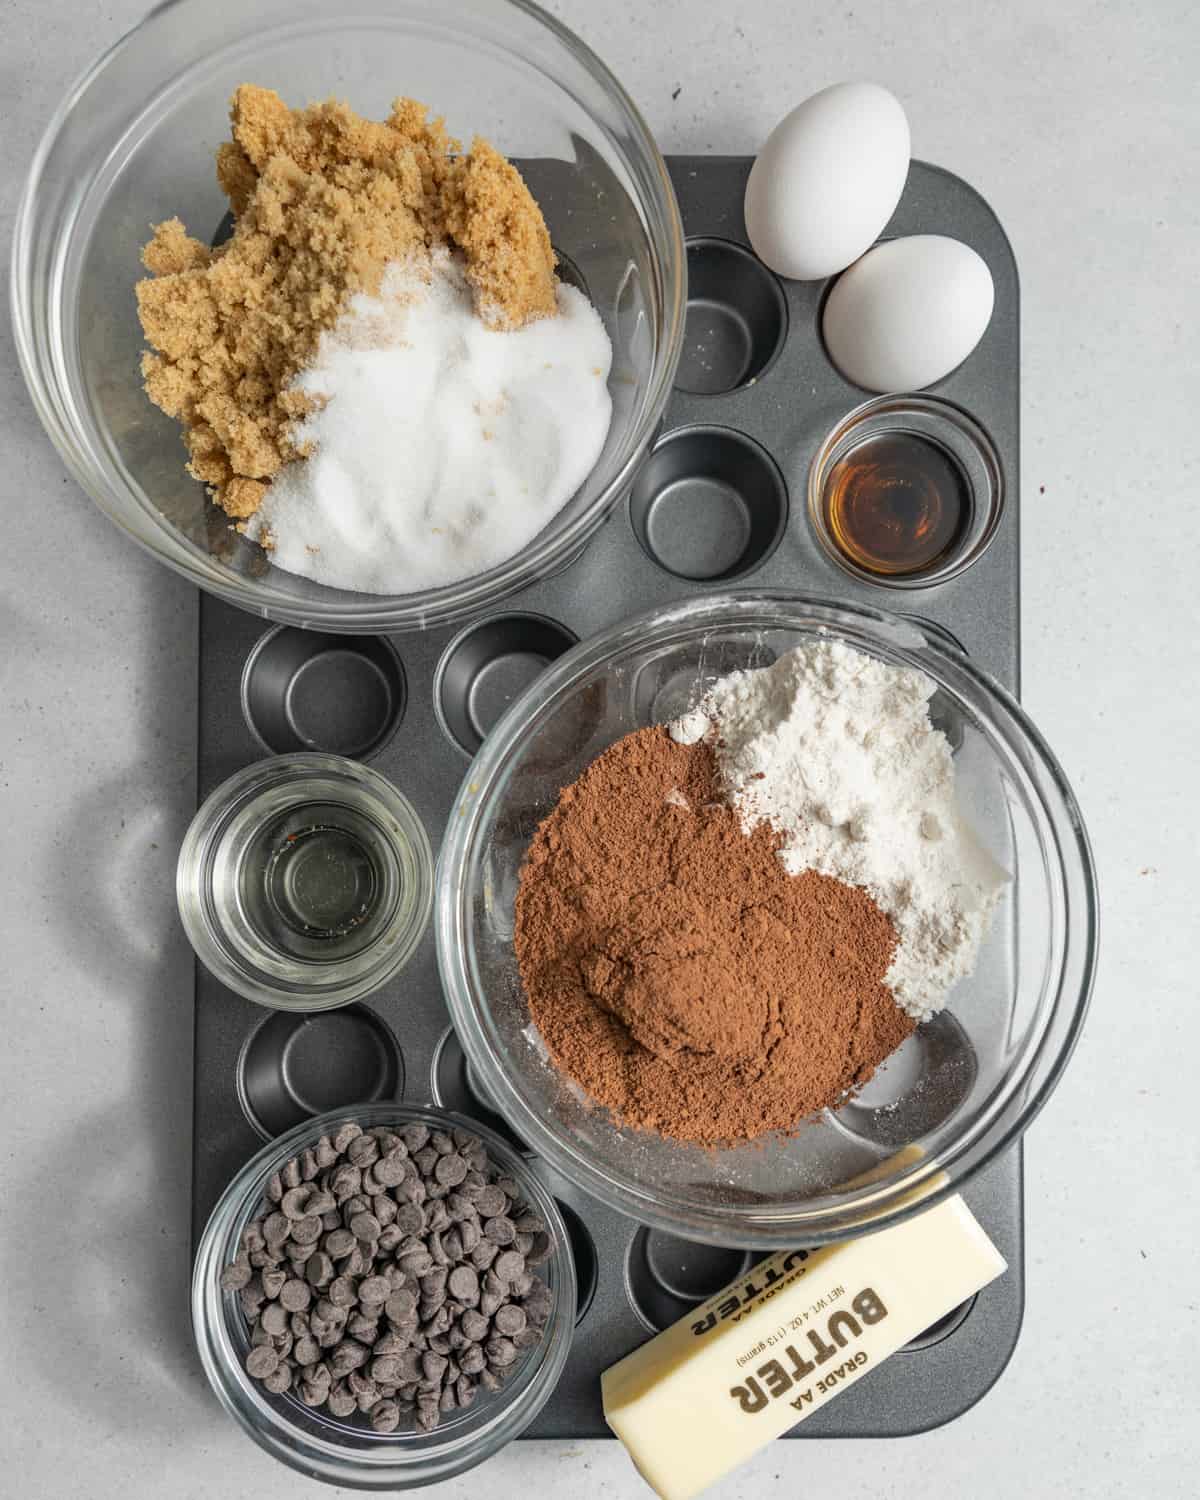 Ingredients for brownie bites in small bowls on top of a mini muffin tin.